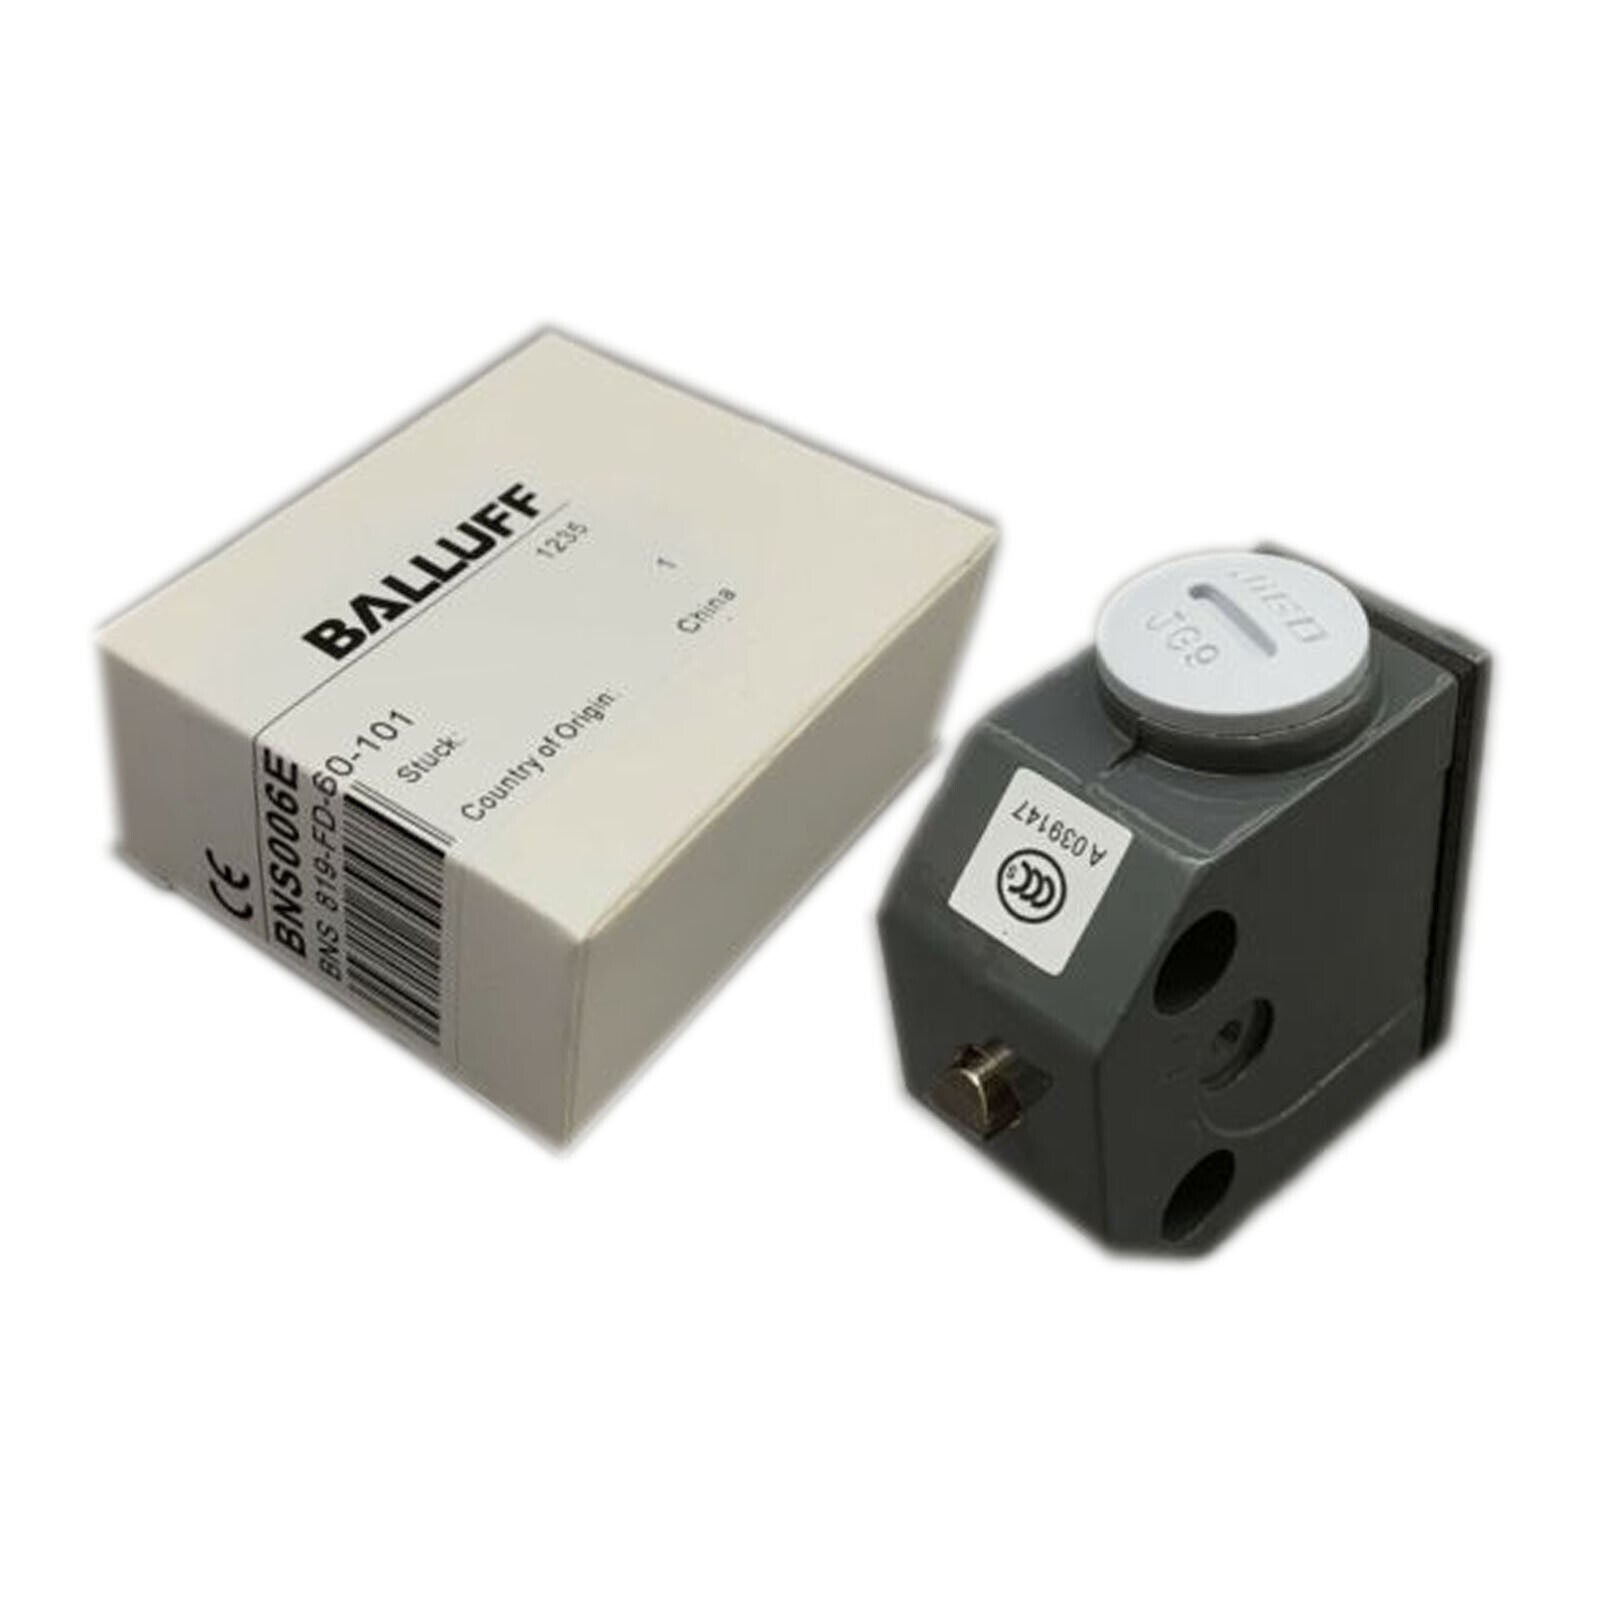 Balluff BNS0003 BNS819-FD-60-101 Position Limit Switches